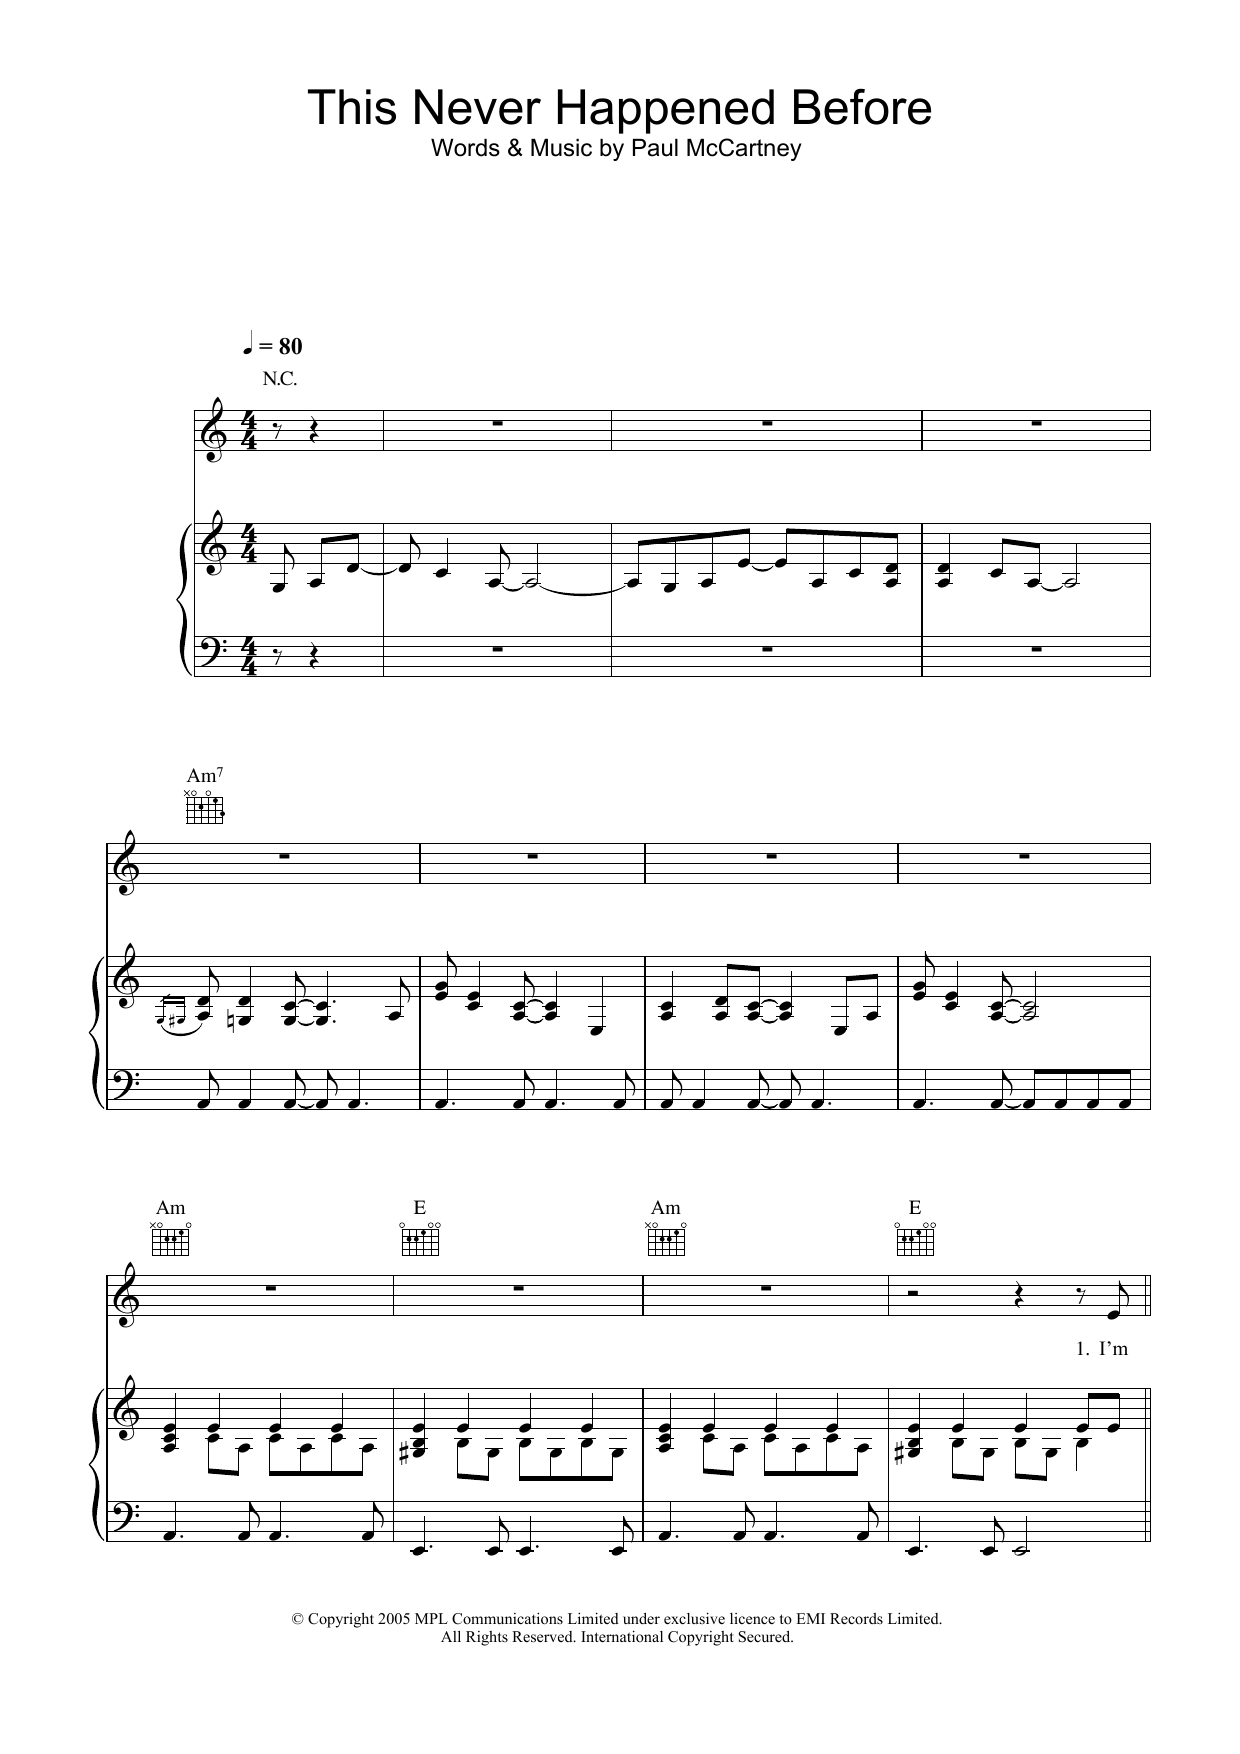 Download Paul McCartney This Never Happened Before Sheet Music